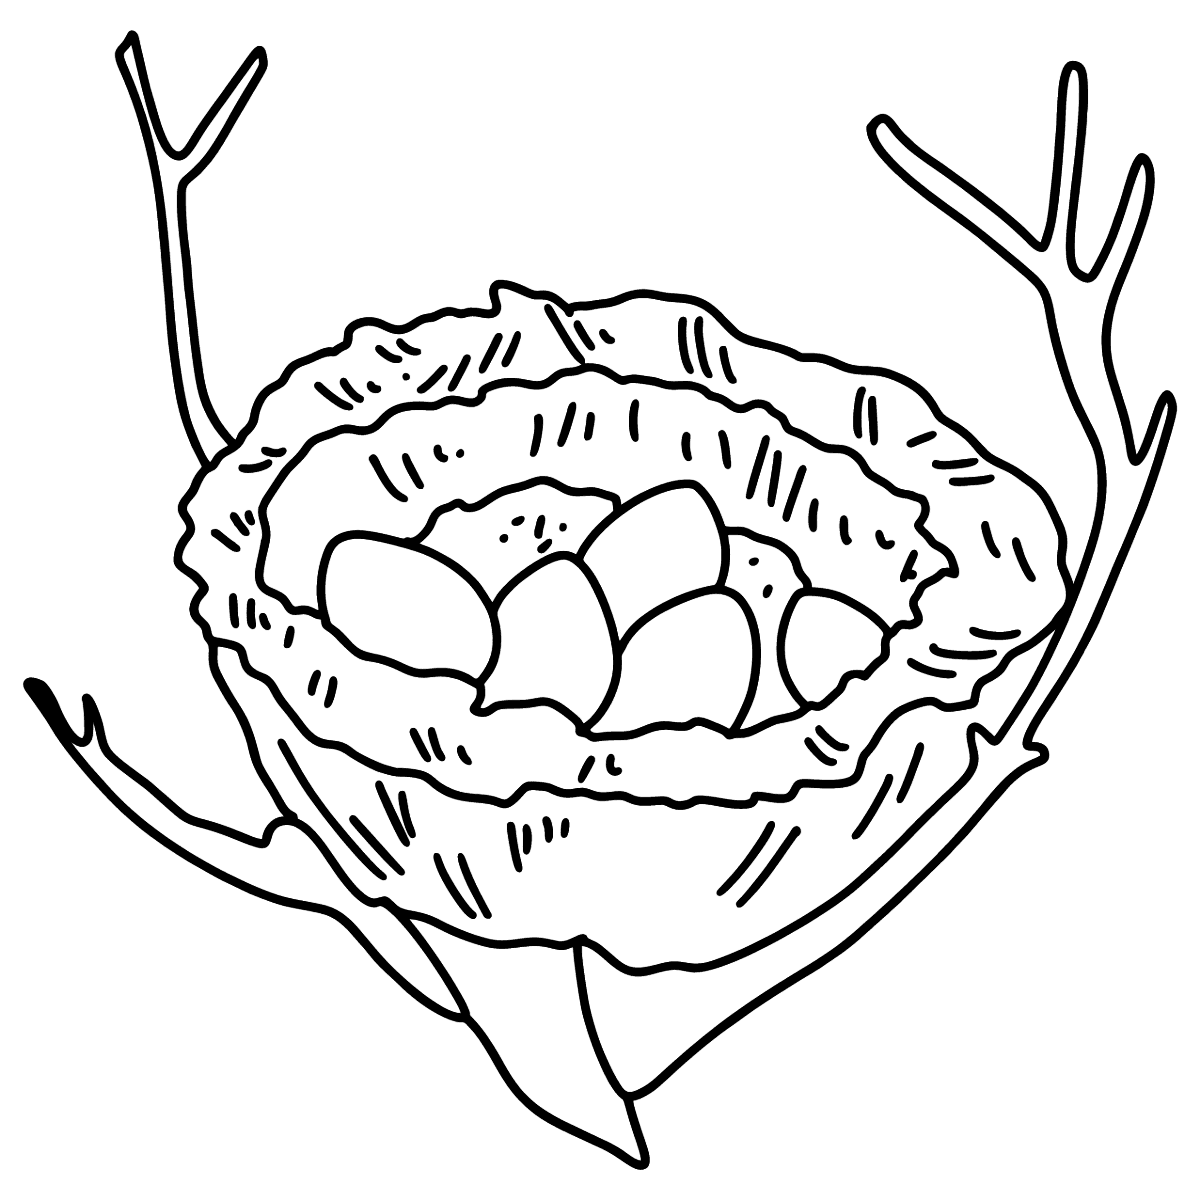 bird-s-nest-coloring-page-online-or-printable-for-free